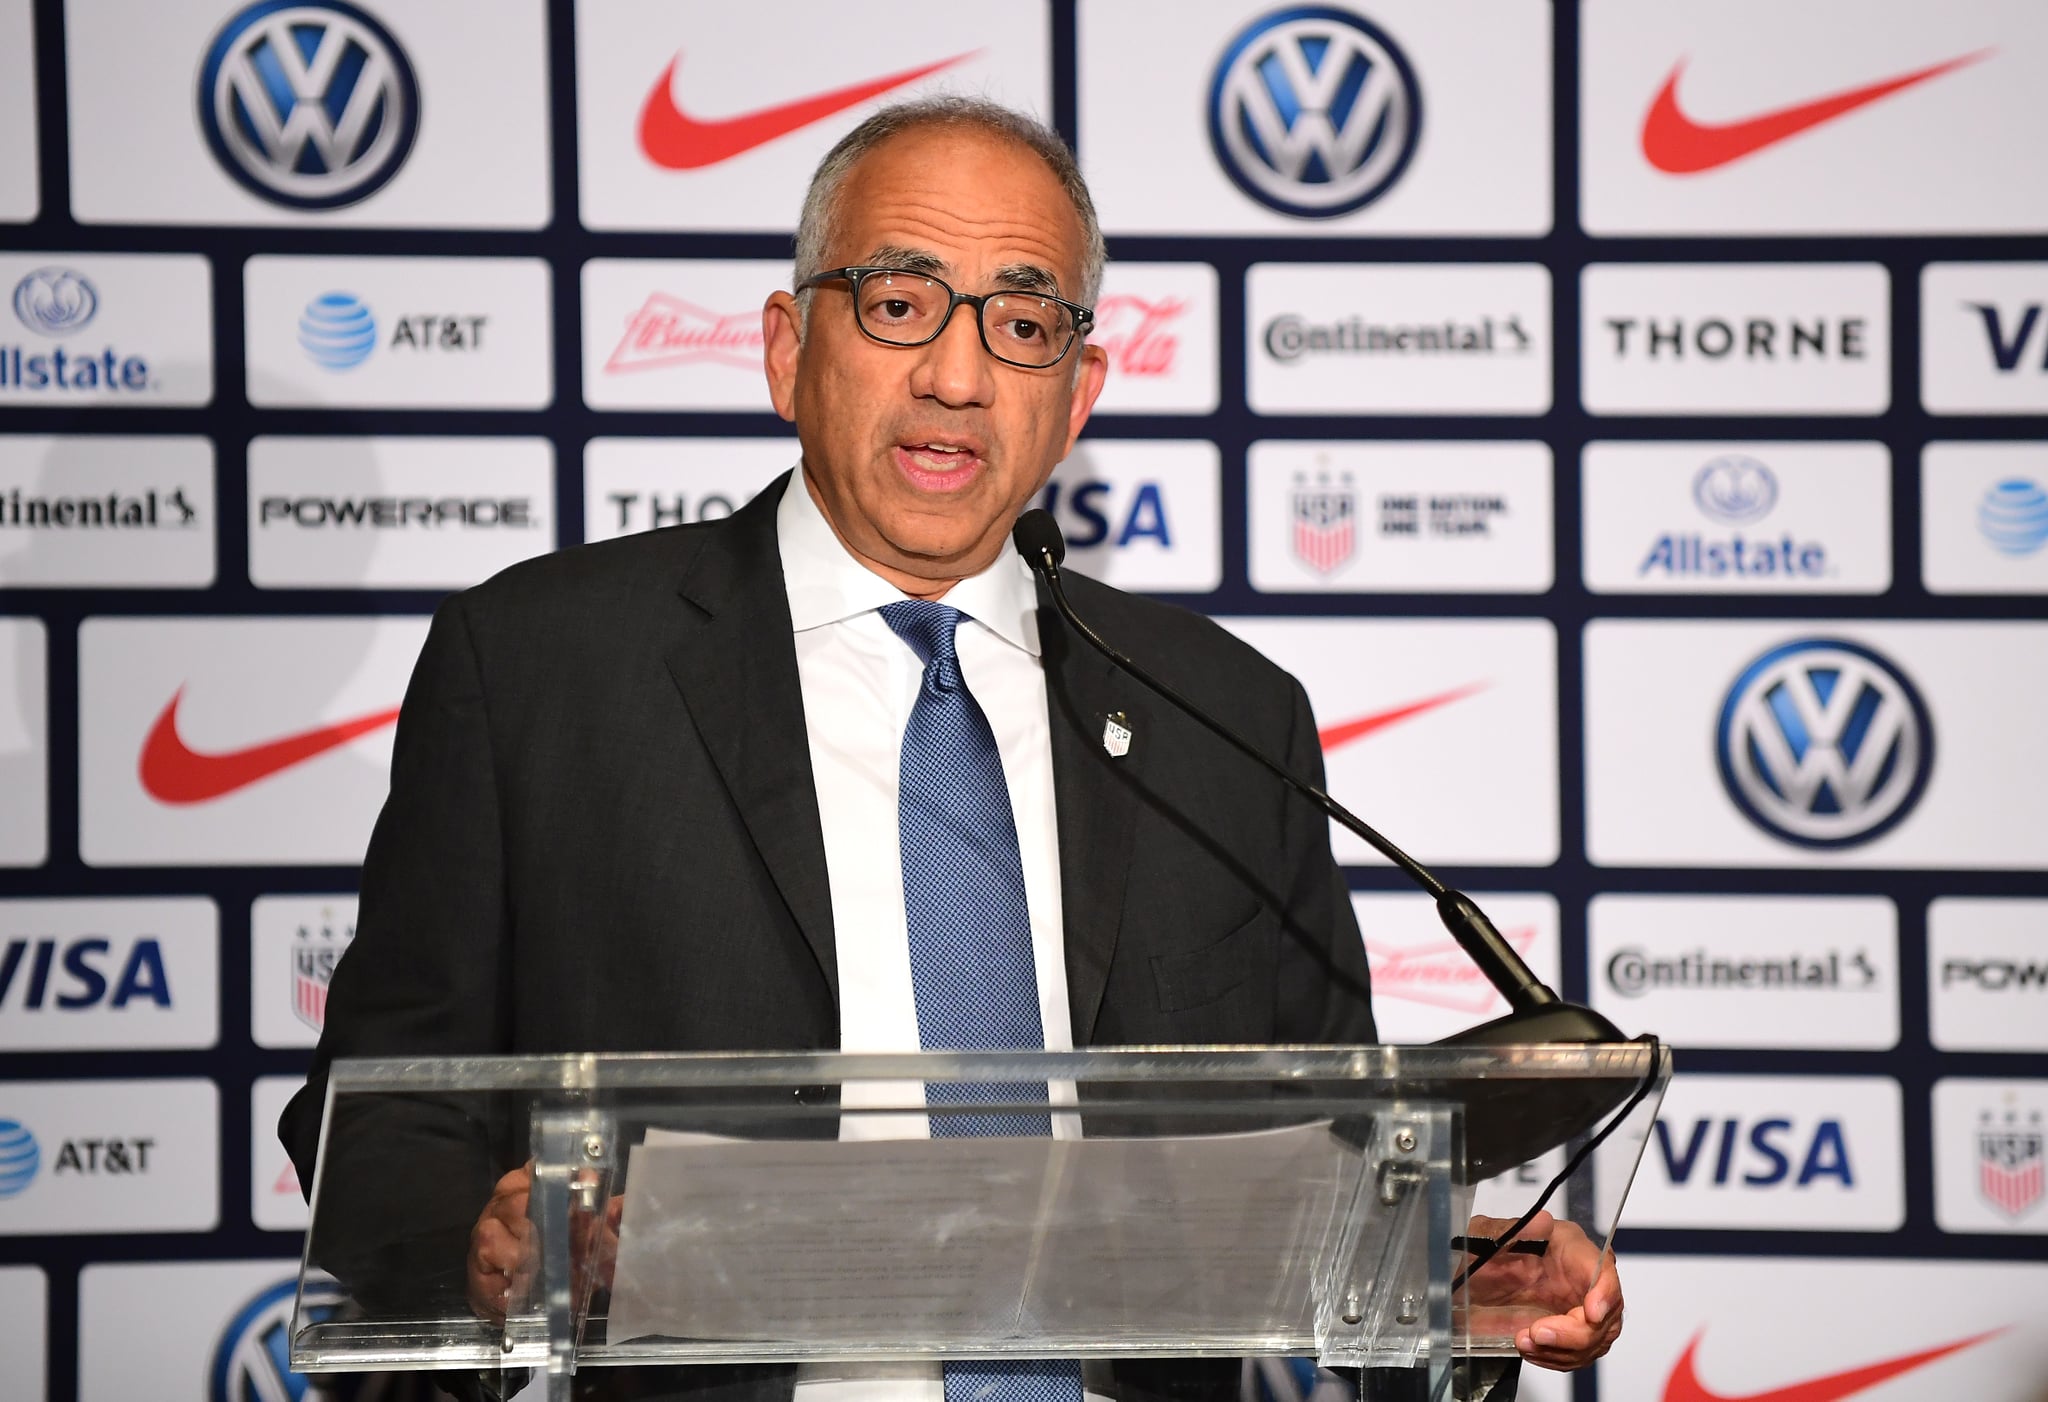 NEW YORK, NEW YORK - OCTOBER 28: Carlos Cordeiro, U.S. Soccer President,  speaks at a press conference where Vlatko Andonovski was introduced as the U.S. Women's National Team head coach, at Kimpton Hotel Eventi on October 28, 2019 in New York City. (Photo by Emilee Chinn/Getty Images)